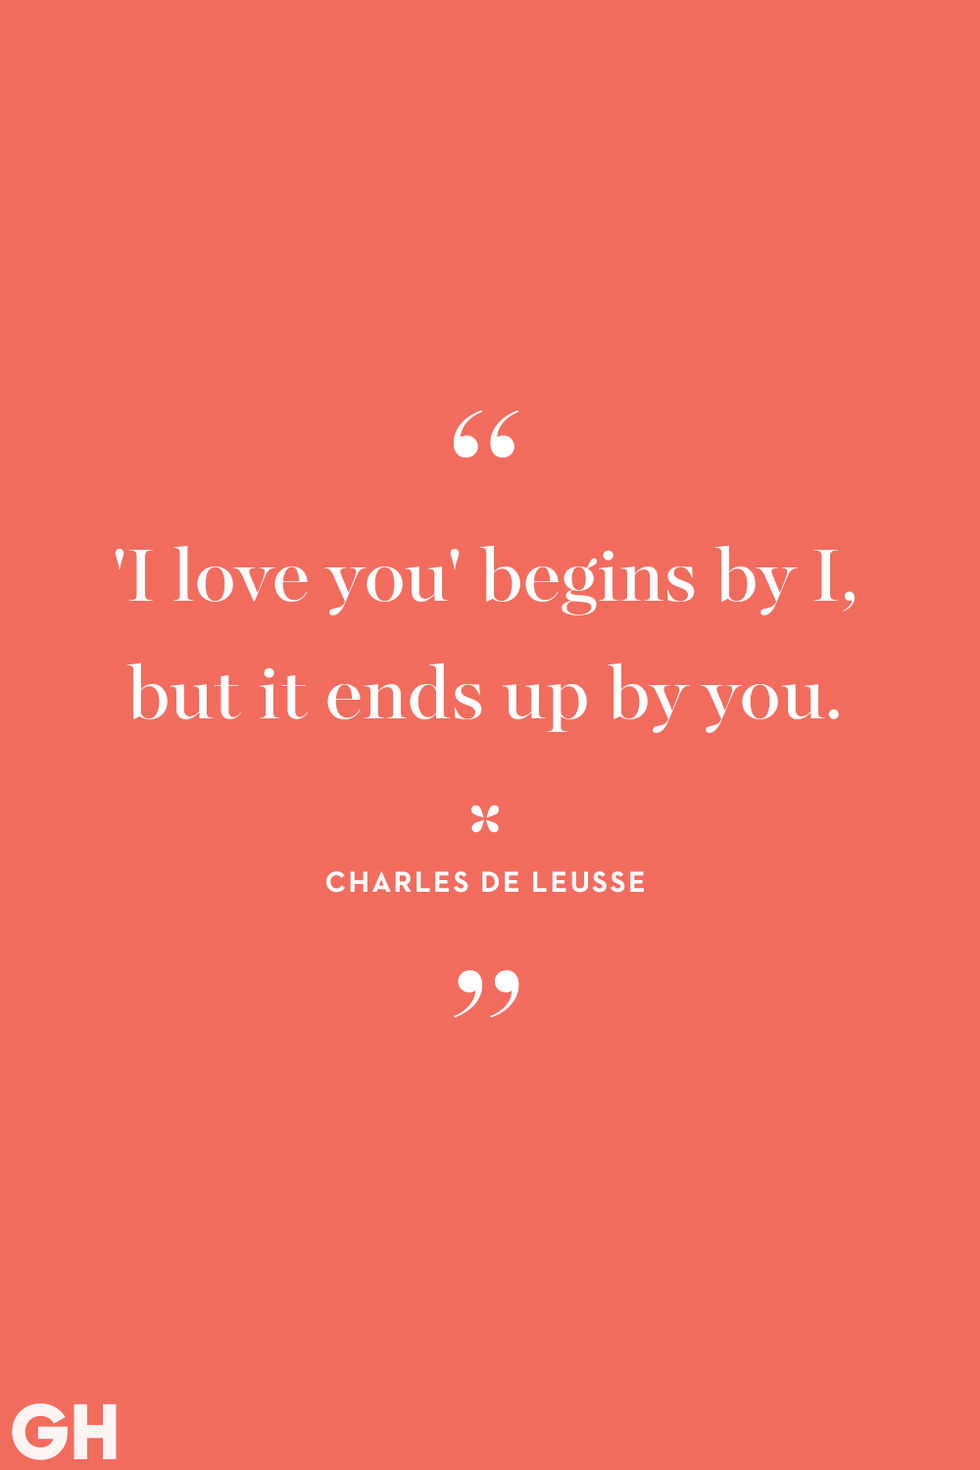 I Love You Quotes for Her: 100 Romantic Love Quotes for Her